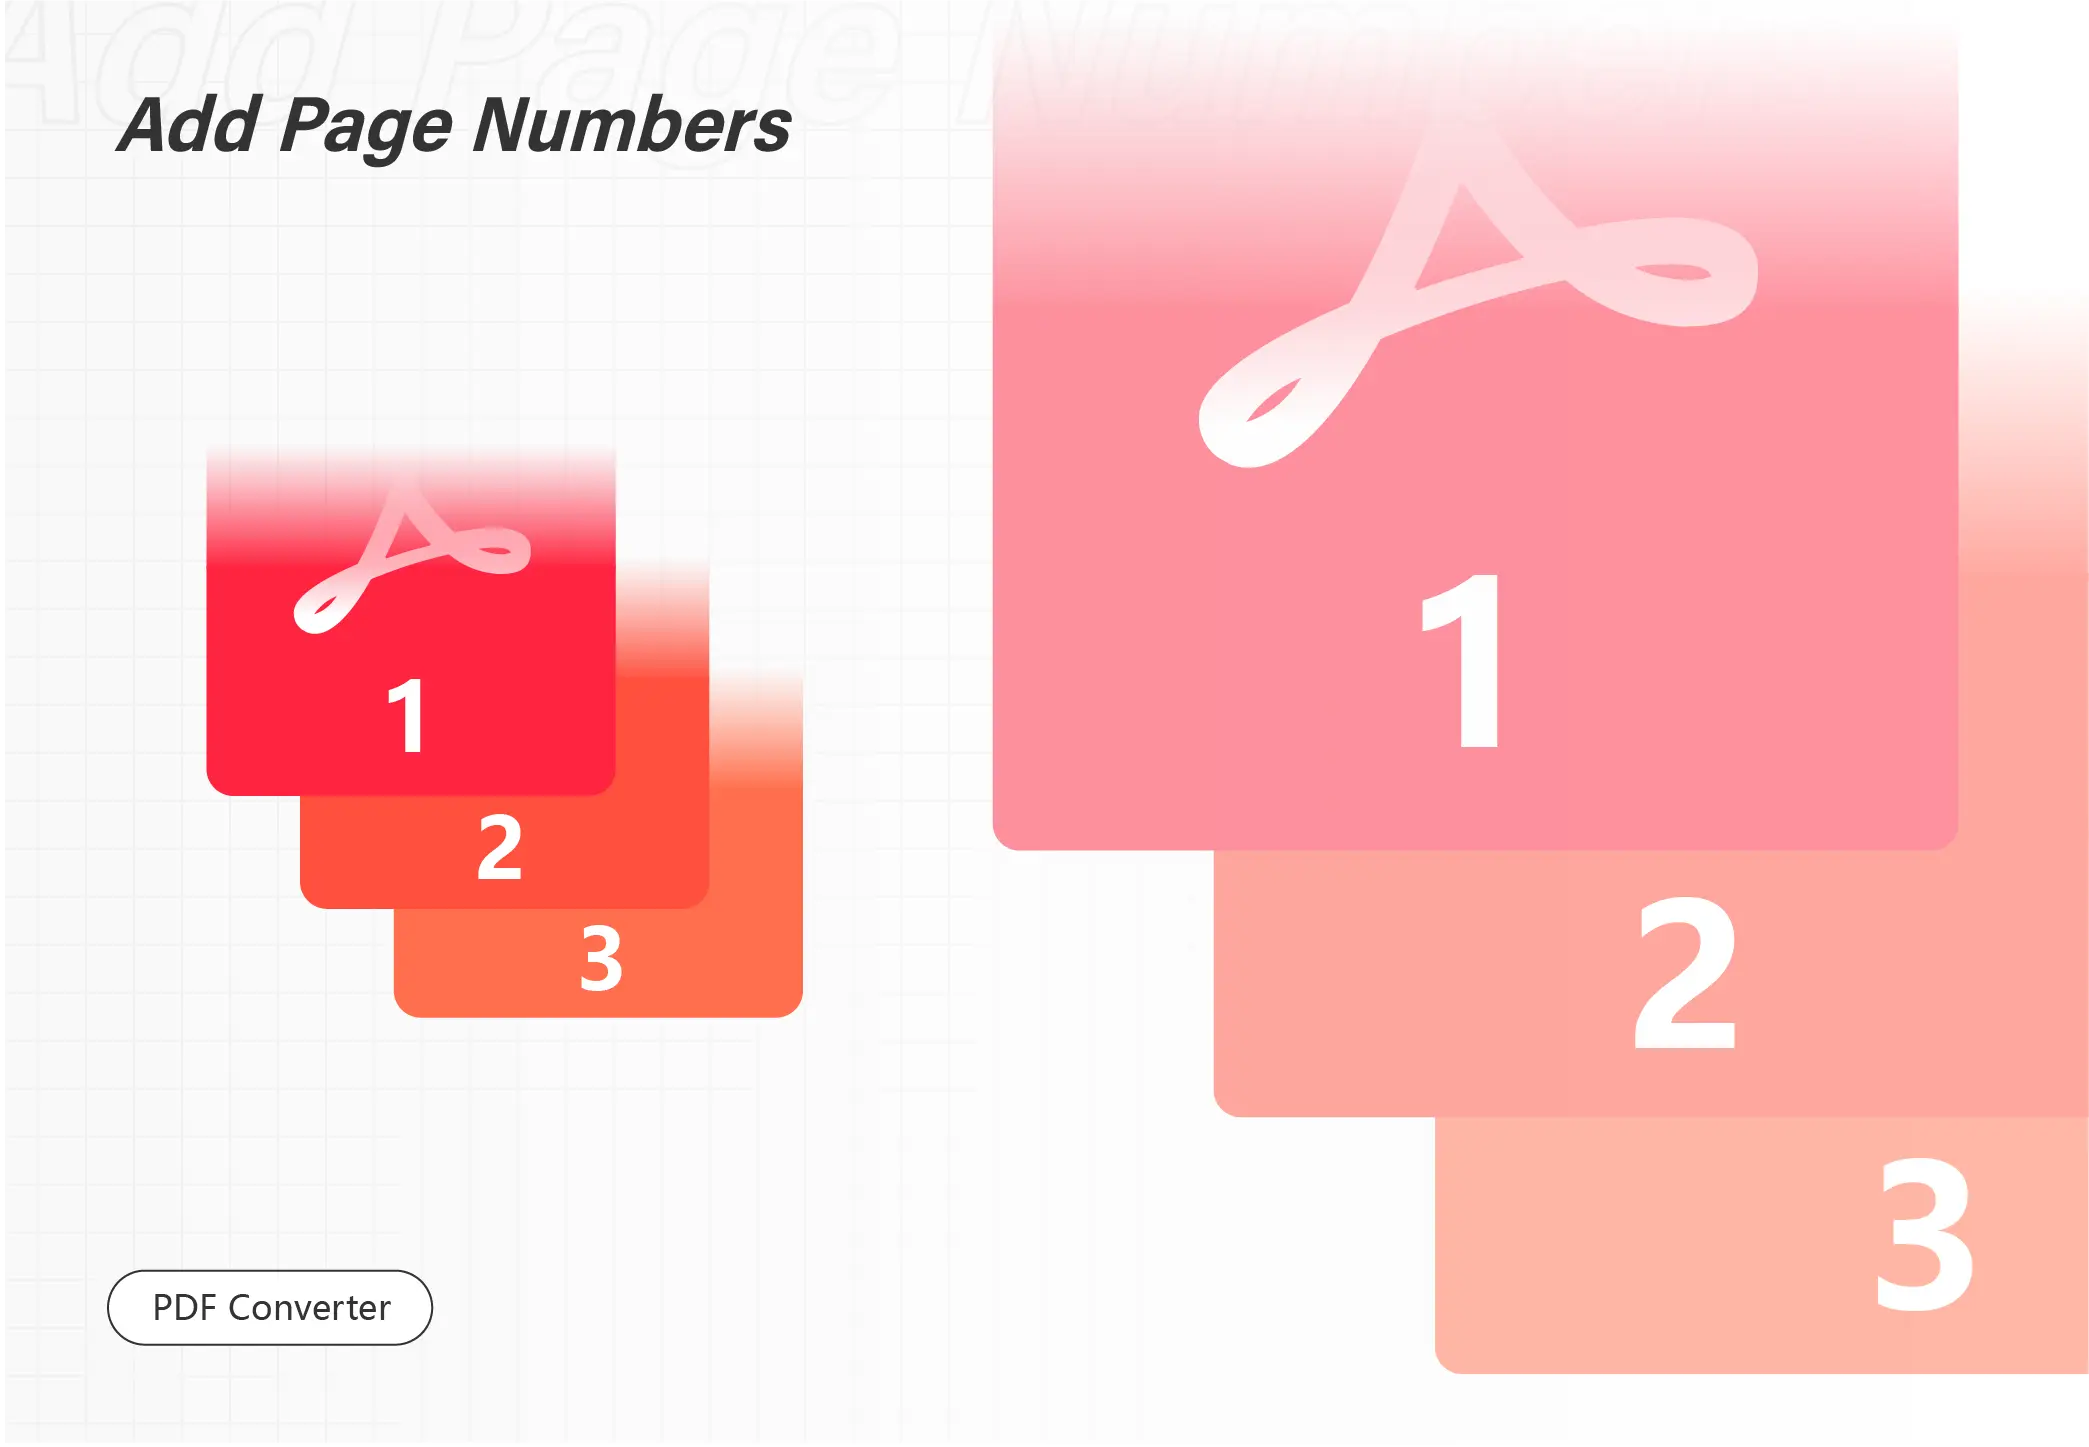 How to Add Page Numbers to a PDF for FREE